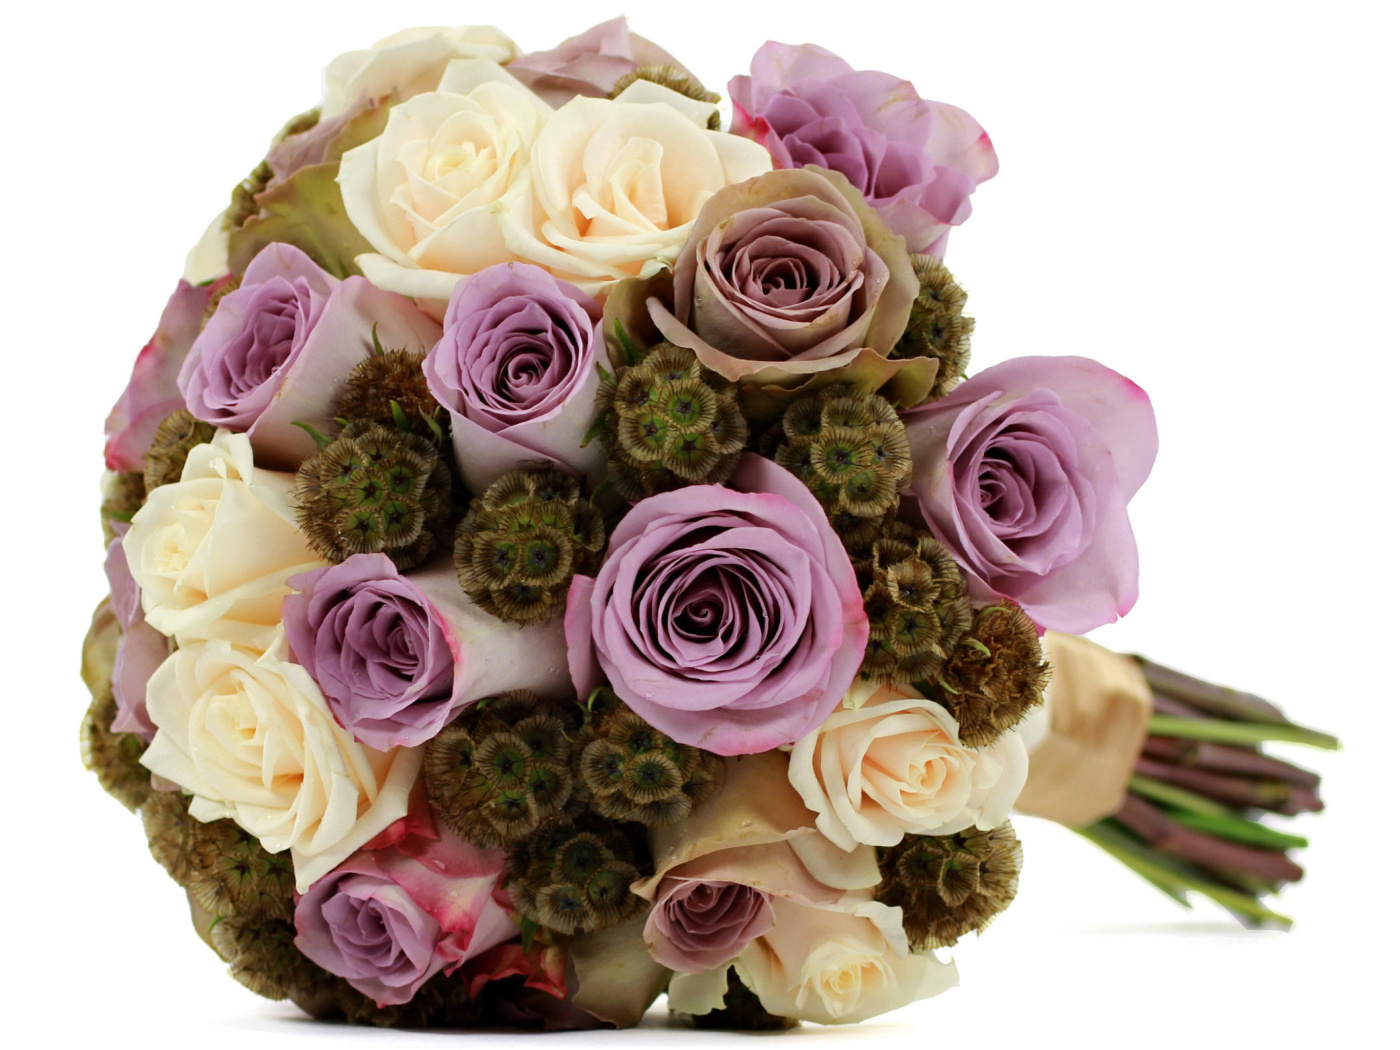 Das Bouquet with lilac roses Wallpaper 1400x1050